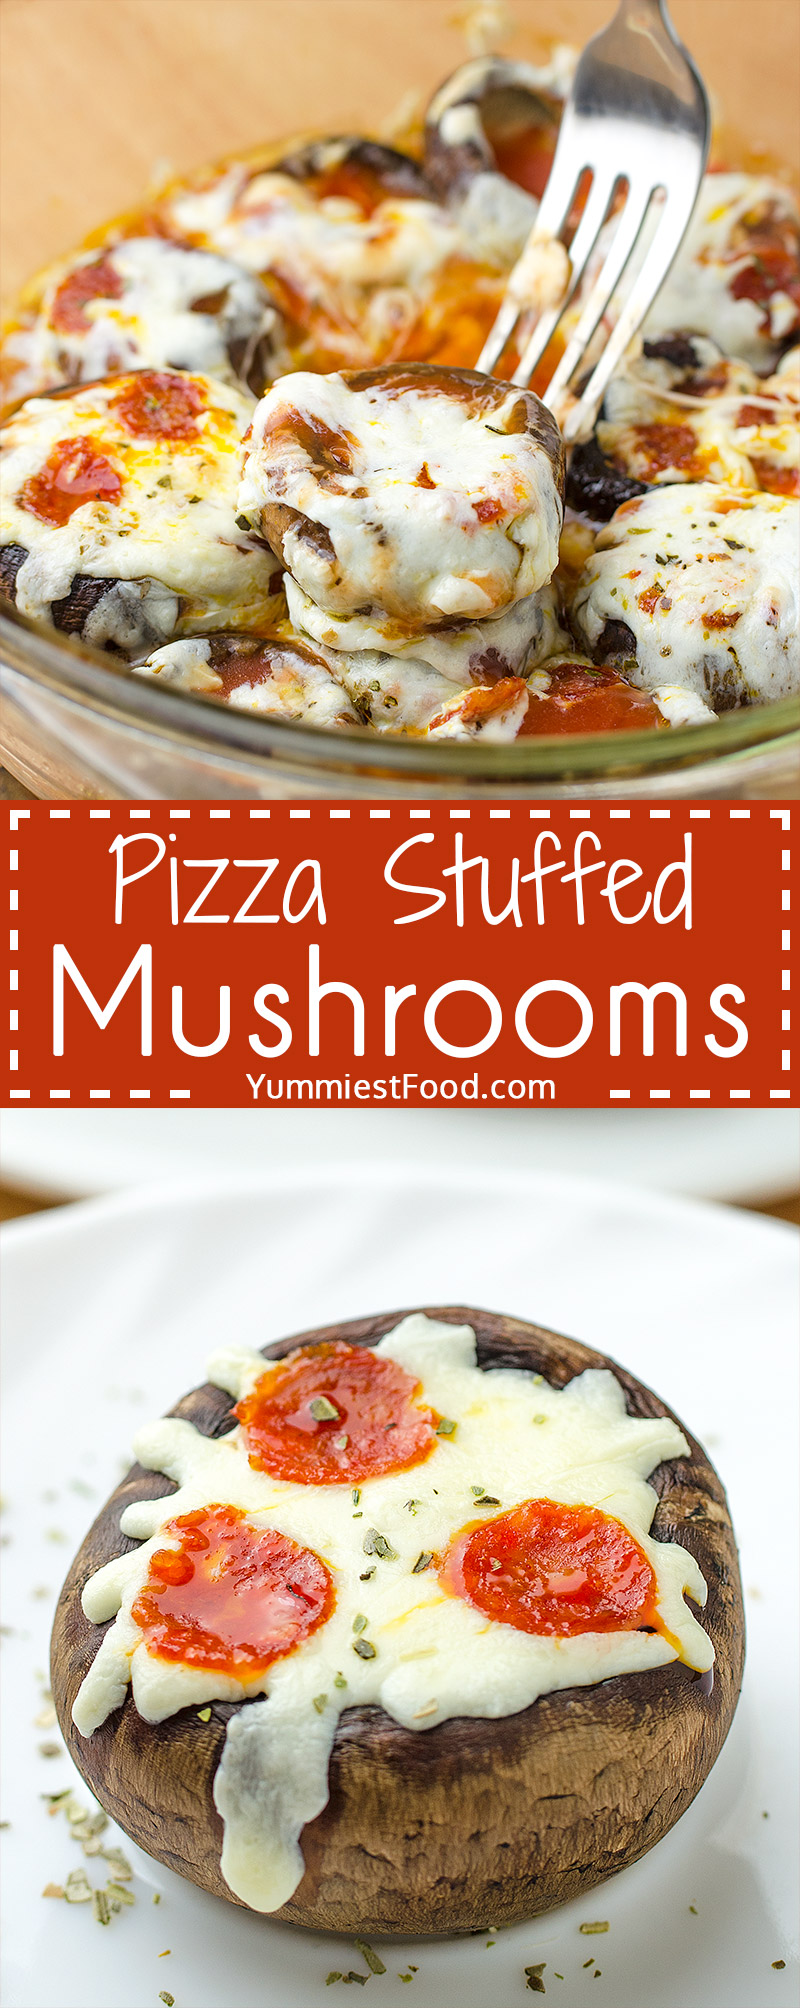 PIZZA STUFFED MUSHROOMS - Homemade, delicious and easy appetizer loved by adults and kids